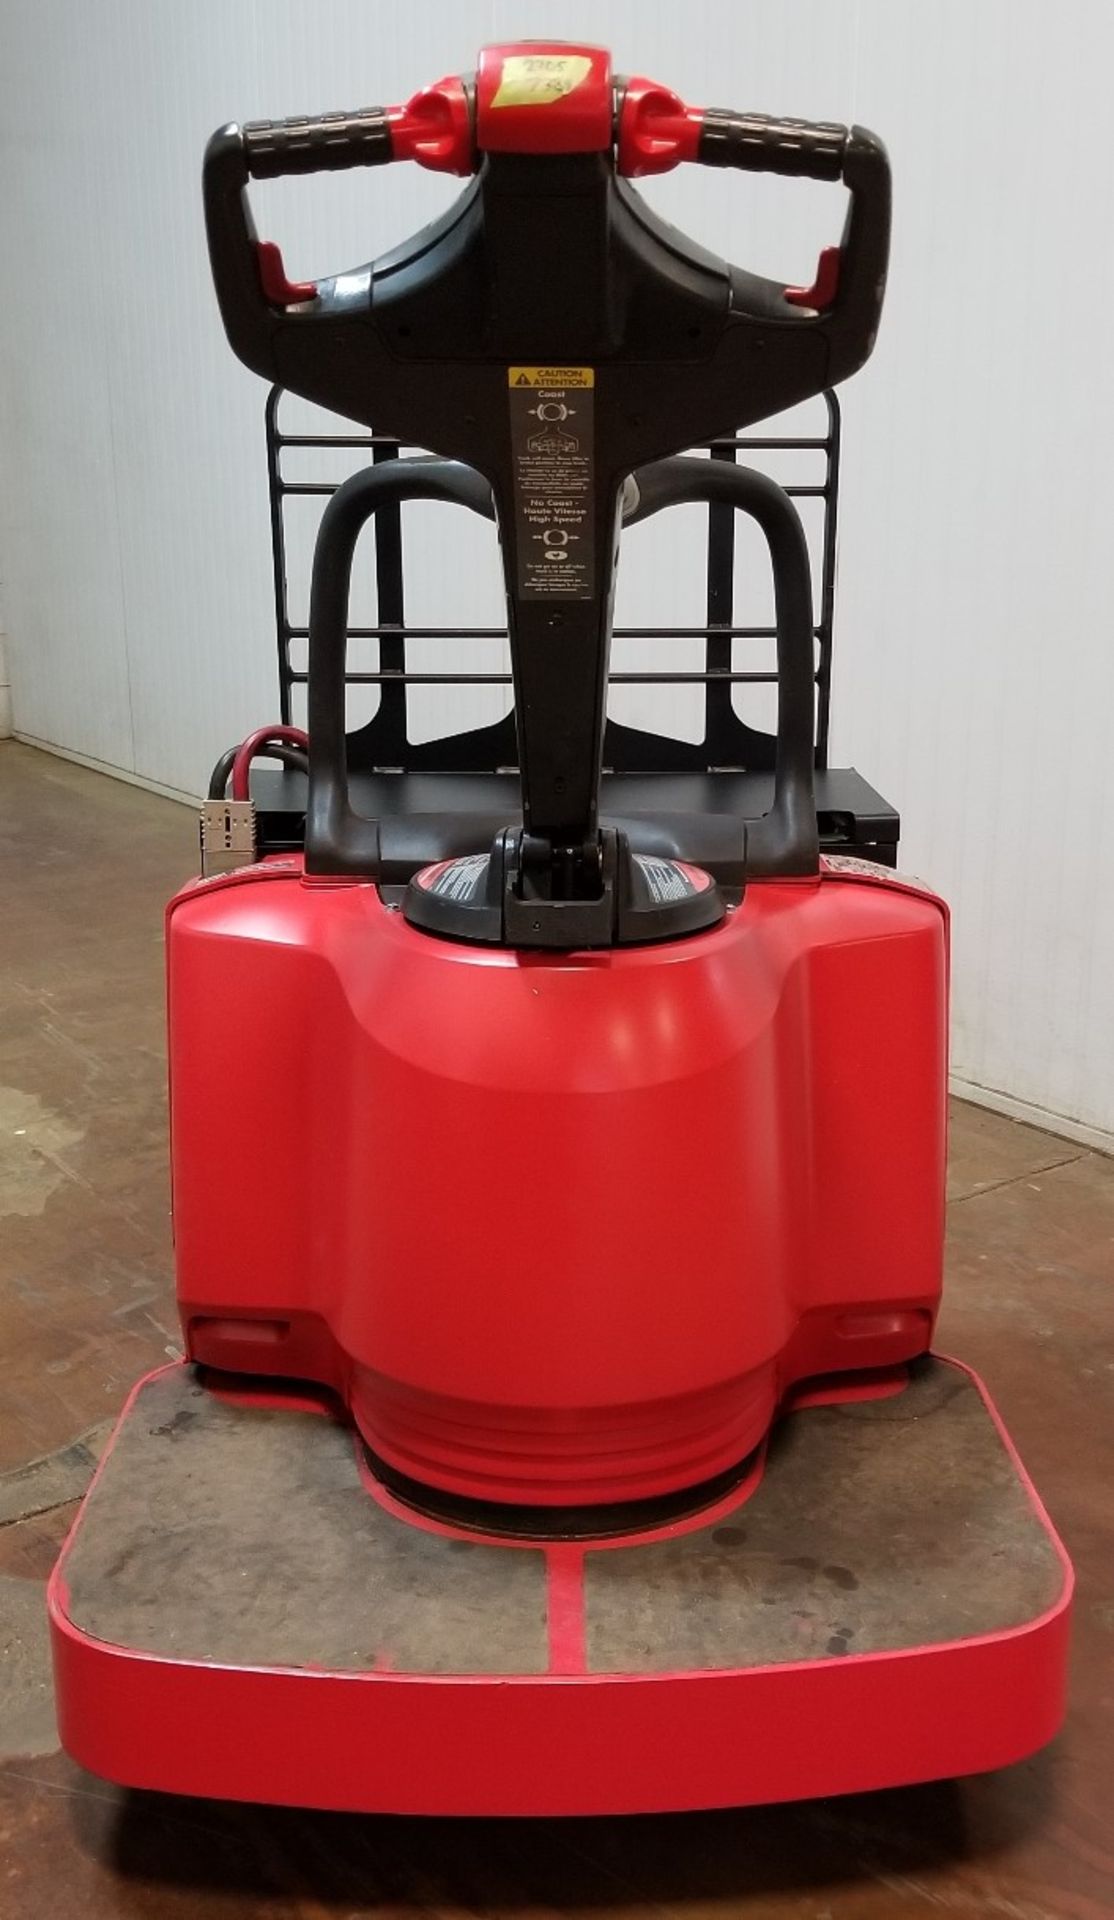 RAYMOND (2010) 8400 24V ELECTRIC RIDEON PALLET JACK WITH 6000 LB. CAPACITY, S/N: 840-10-84375 ( - Image 3 of 3